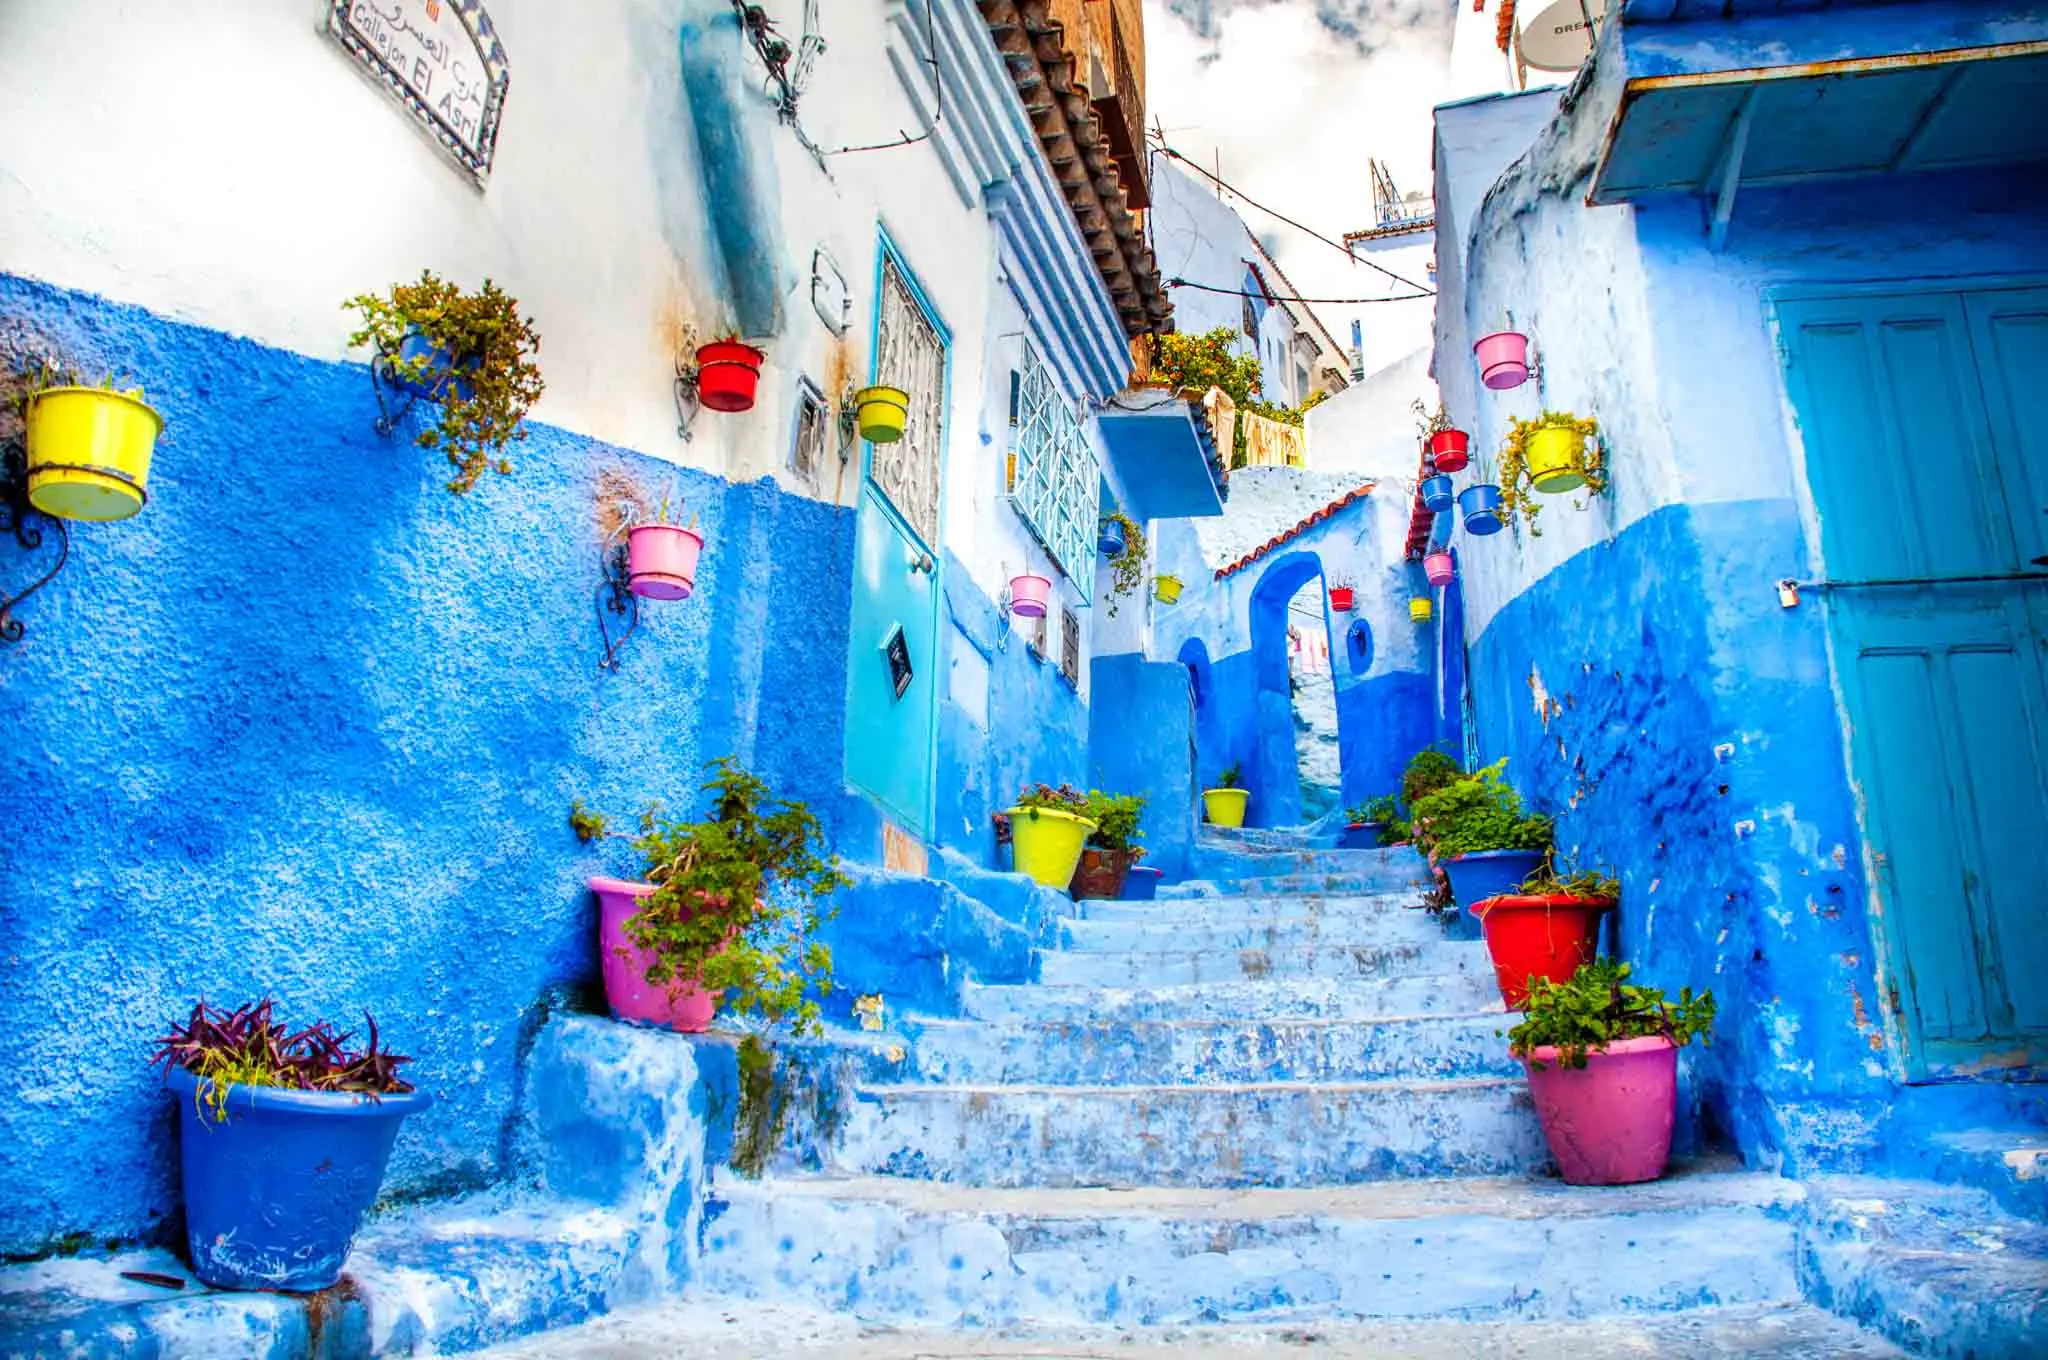 Colorful pots with plants line a blue staircase